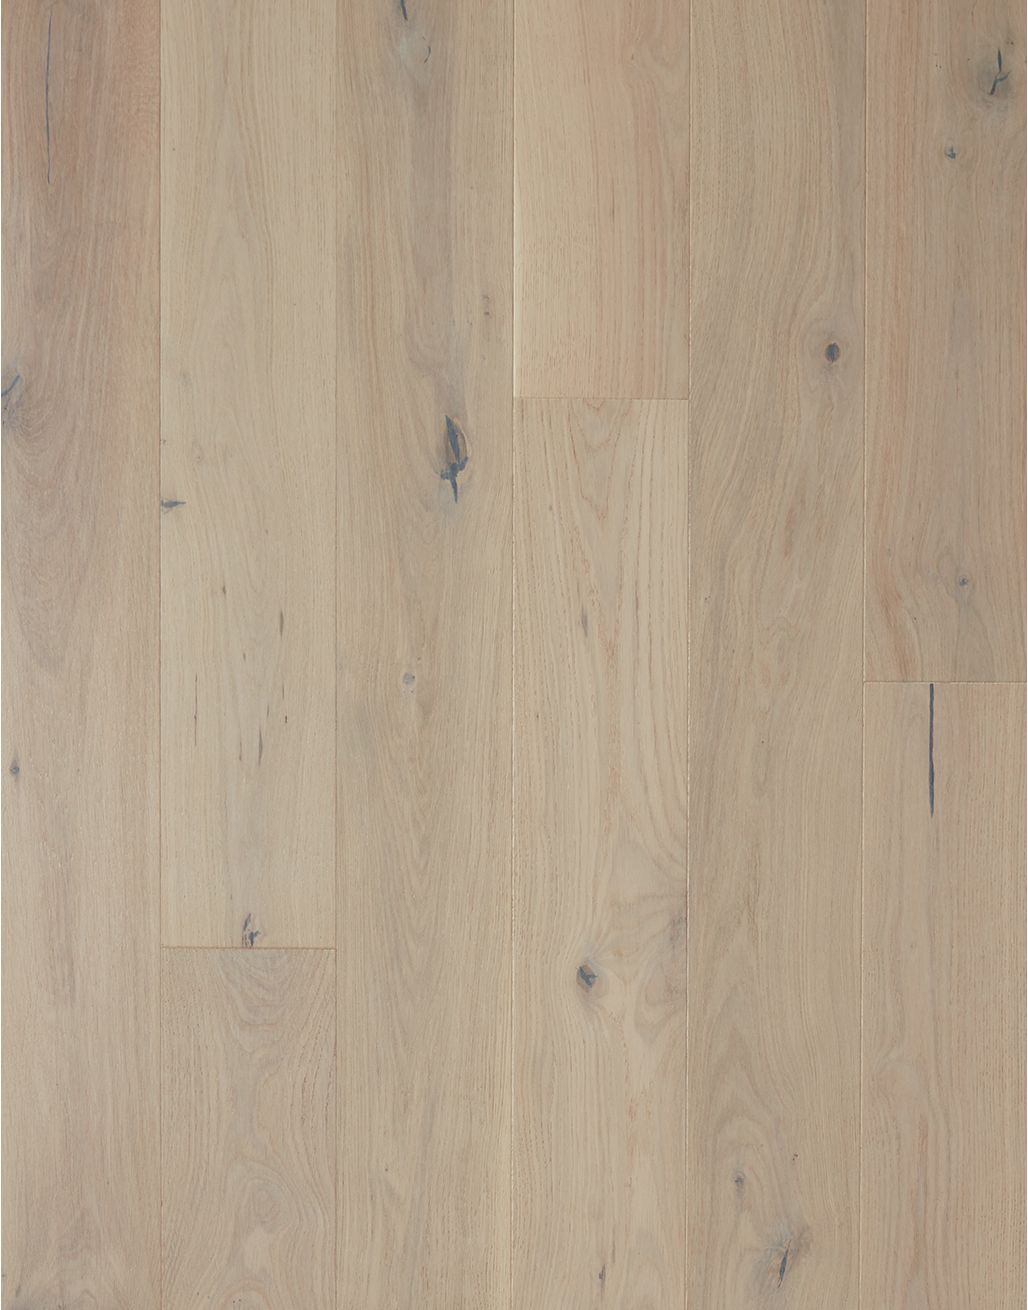 Kensington Cappuccino Oak Brushed & Lacquered Engineered Wood Flooring 3